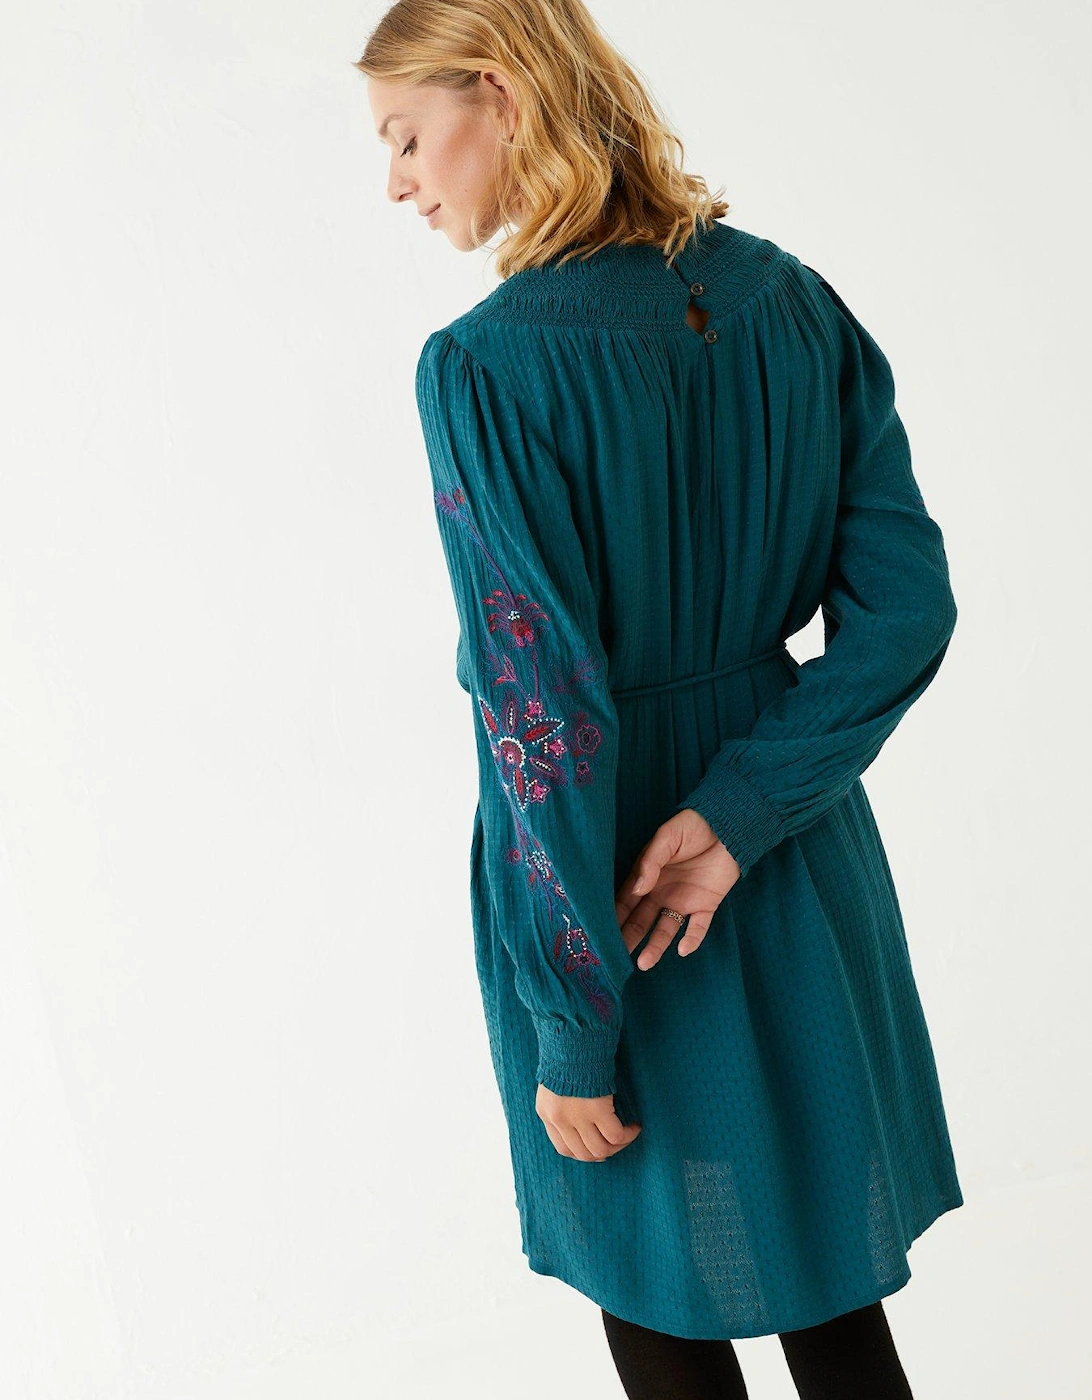 Hove Embroidered Dress - Teal